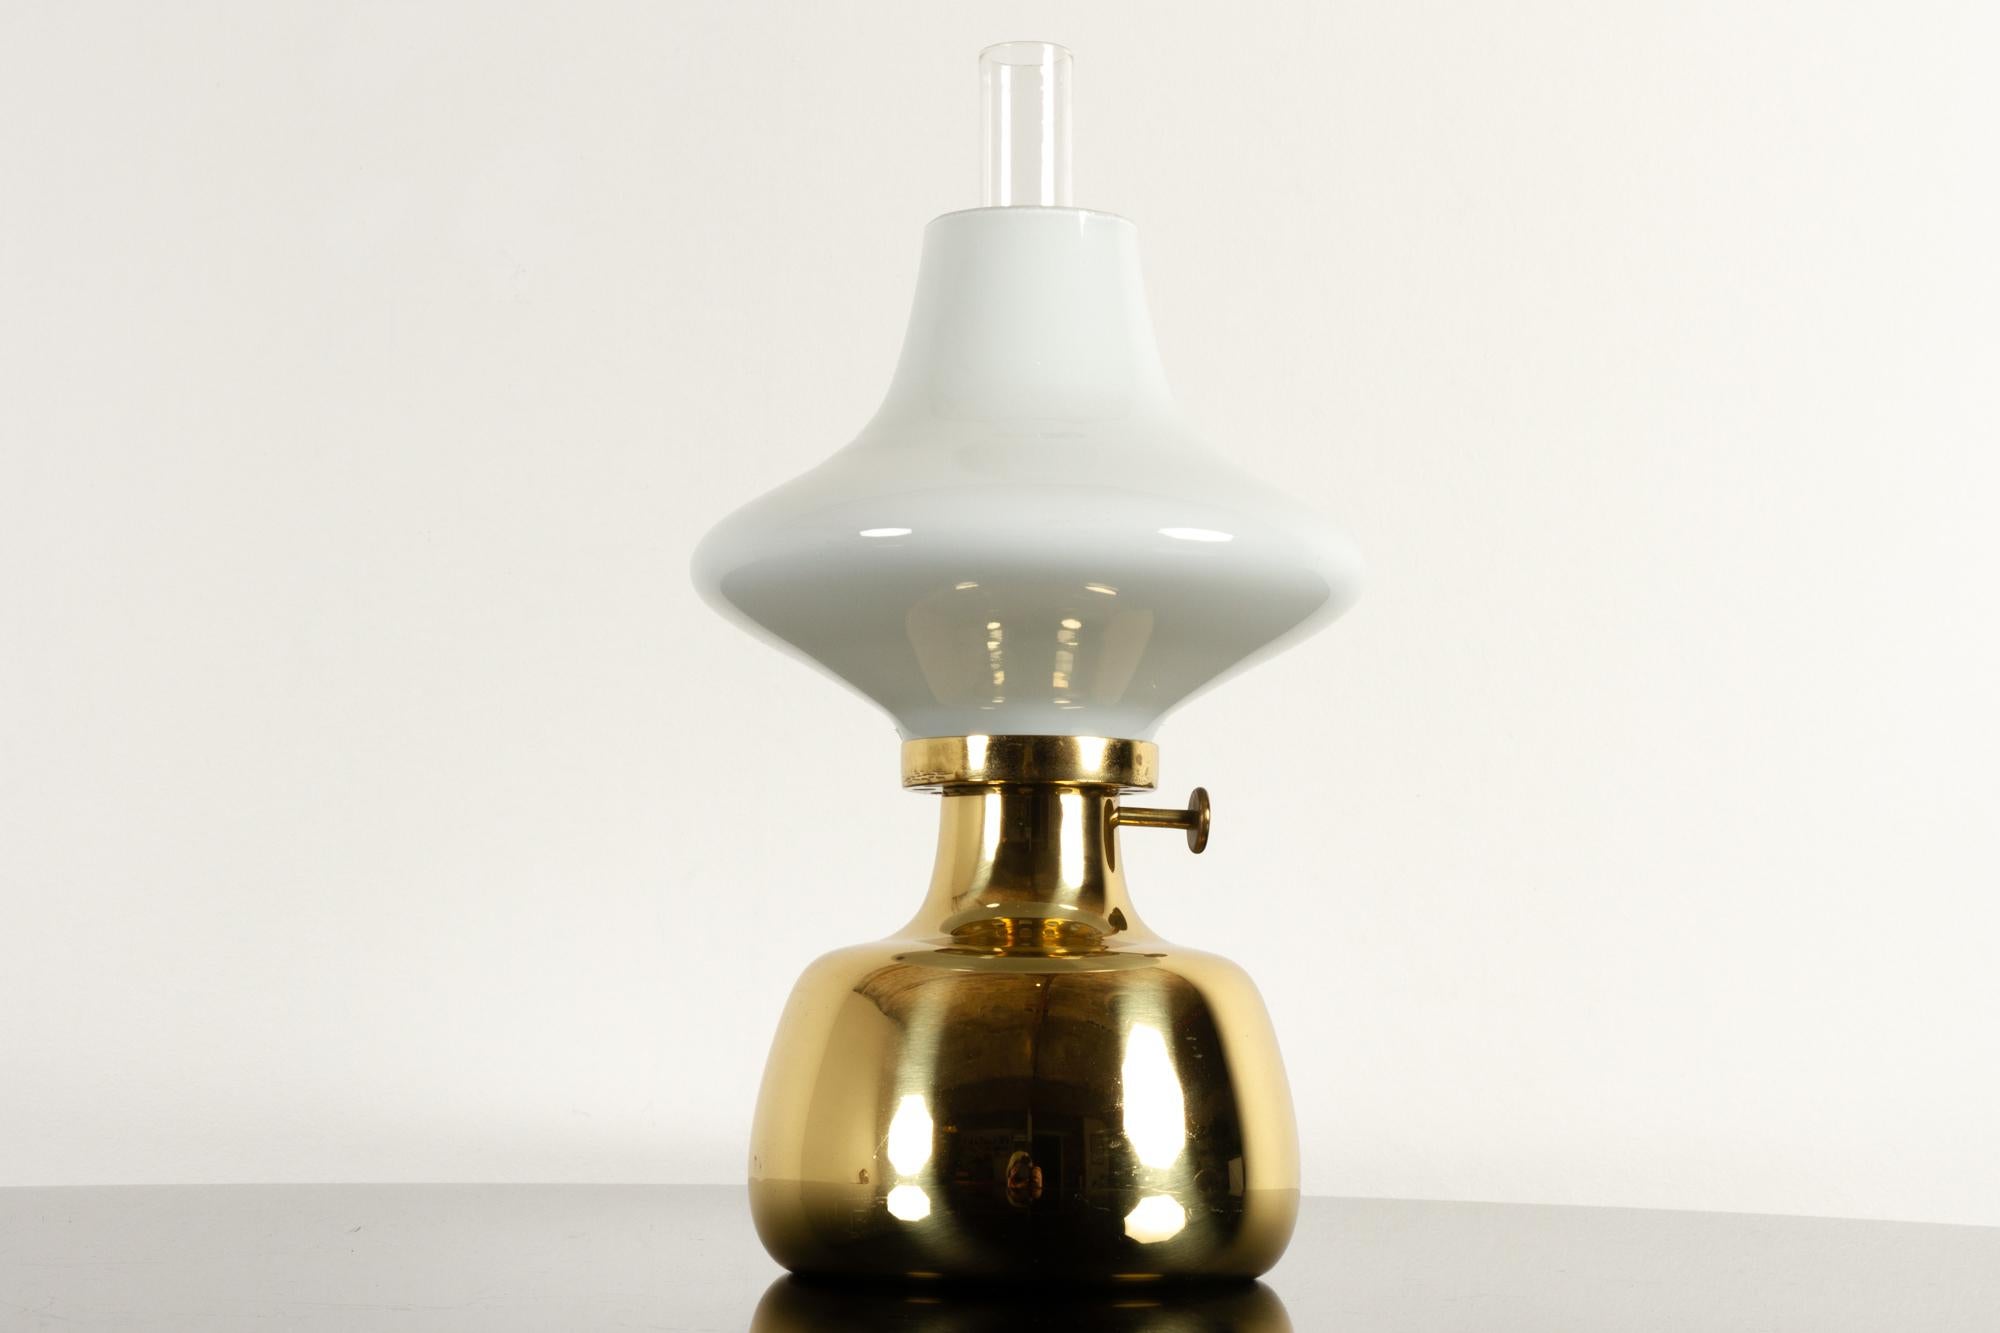 Petronella lamp by Henning Koppel for Louis Poulsen, 1960s.
Danish oil lamp in brass and white opaline glass. Designed by Danish designer Henning Koppel in 1961. The lamp body was handmade by Louis Poulsen in Denmark. The glass parts were made by